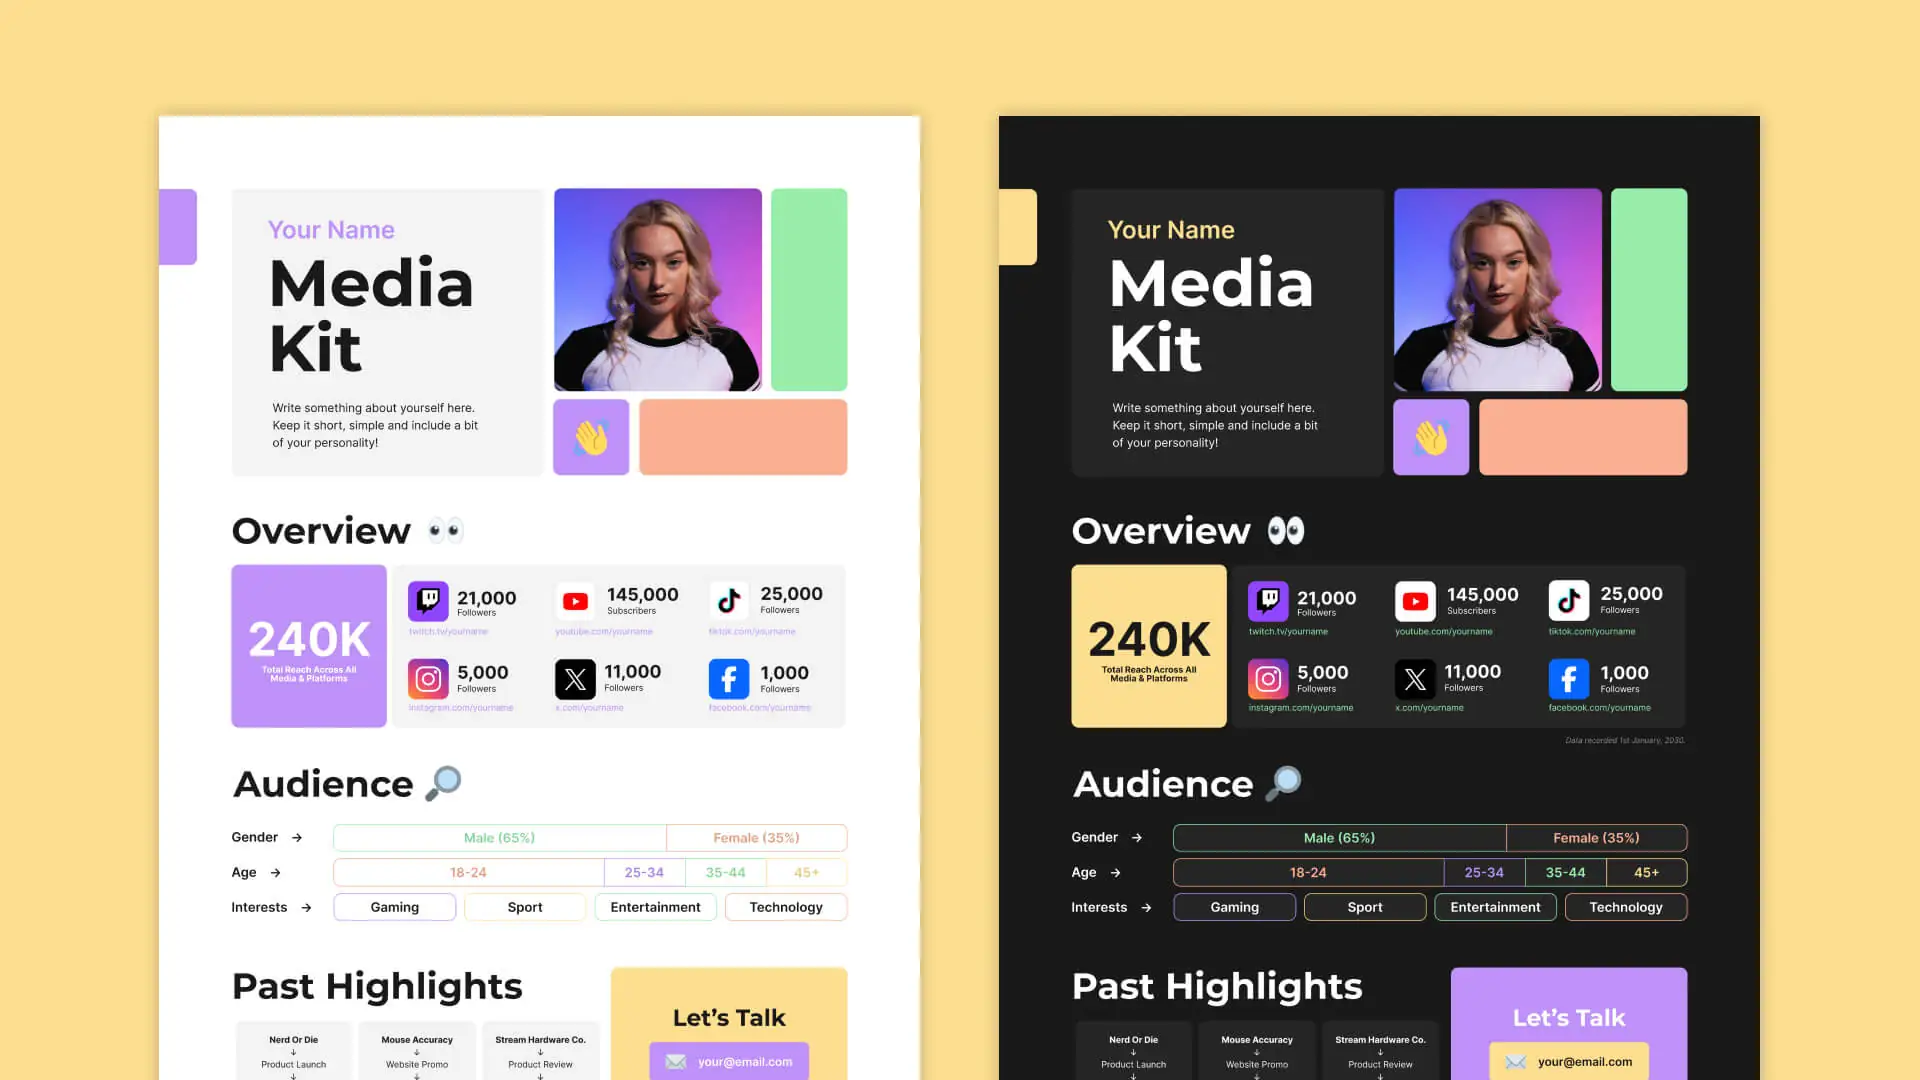 Content Creator Media Kit Template for Content Creators, Influencers and Live Streamers